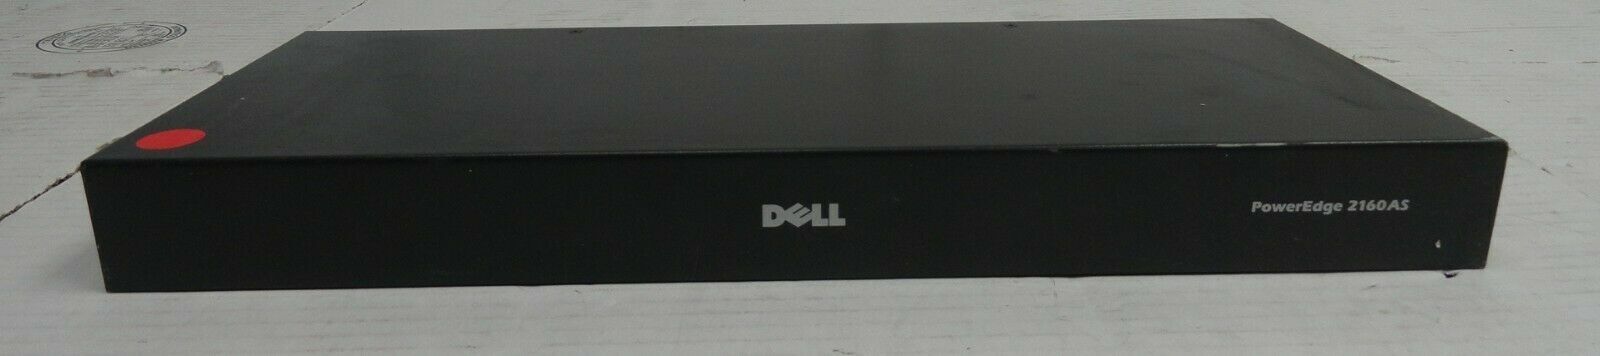 Dell PowerEdge 2160AS 16-port KVM Switch  520-377-007 REV A Switch 